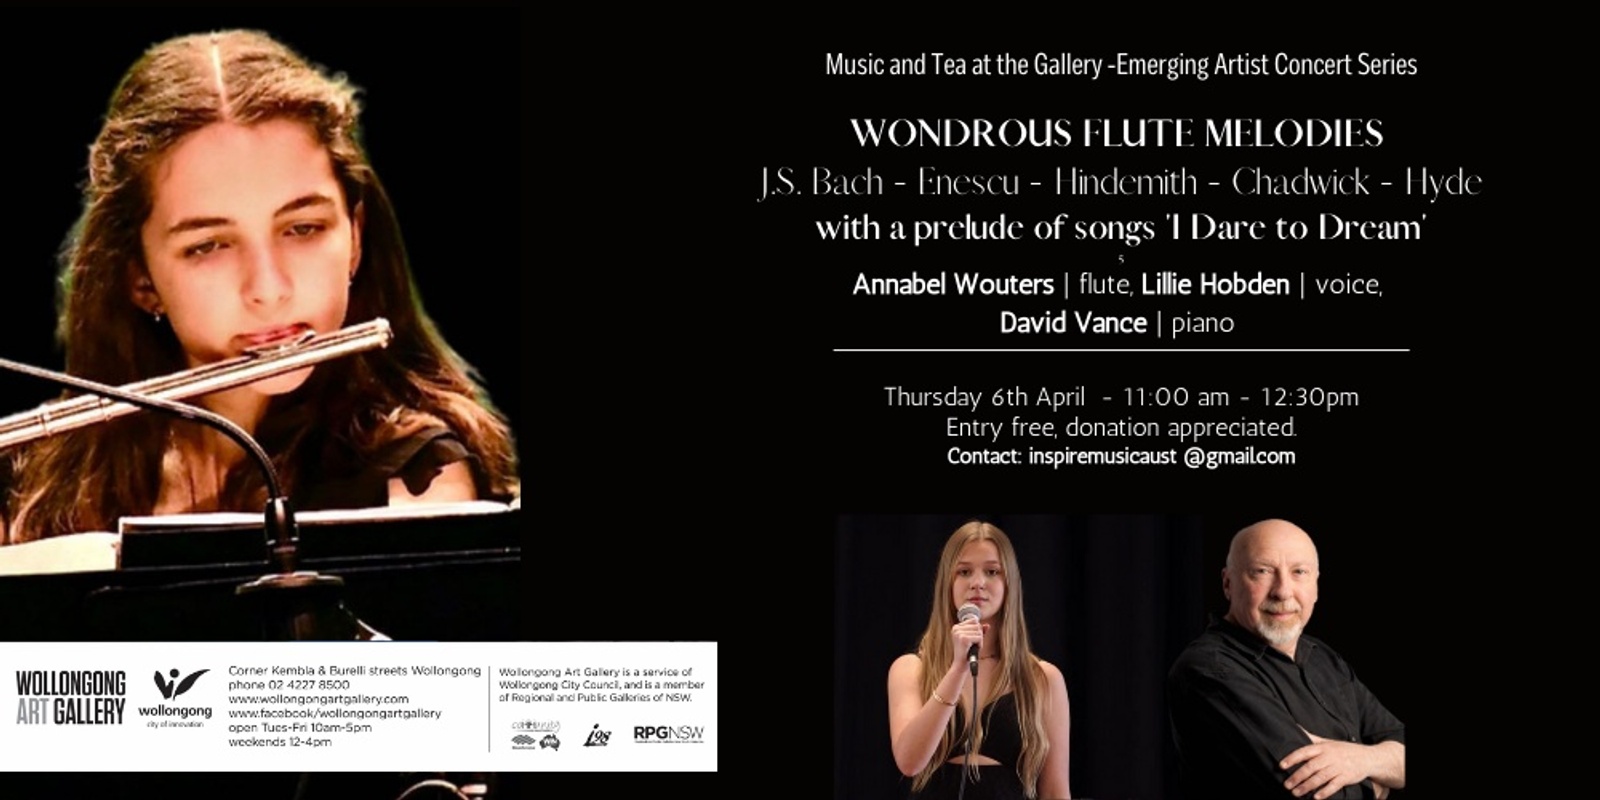 Banner image for Music and Tea at the Gallery - Wondrous Flute Melodies 